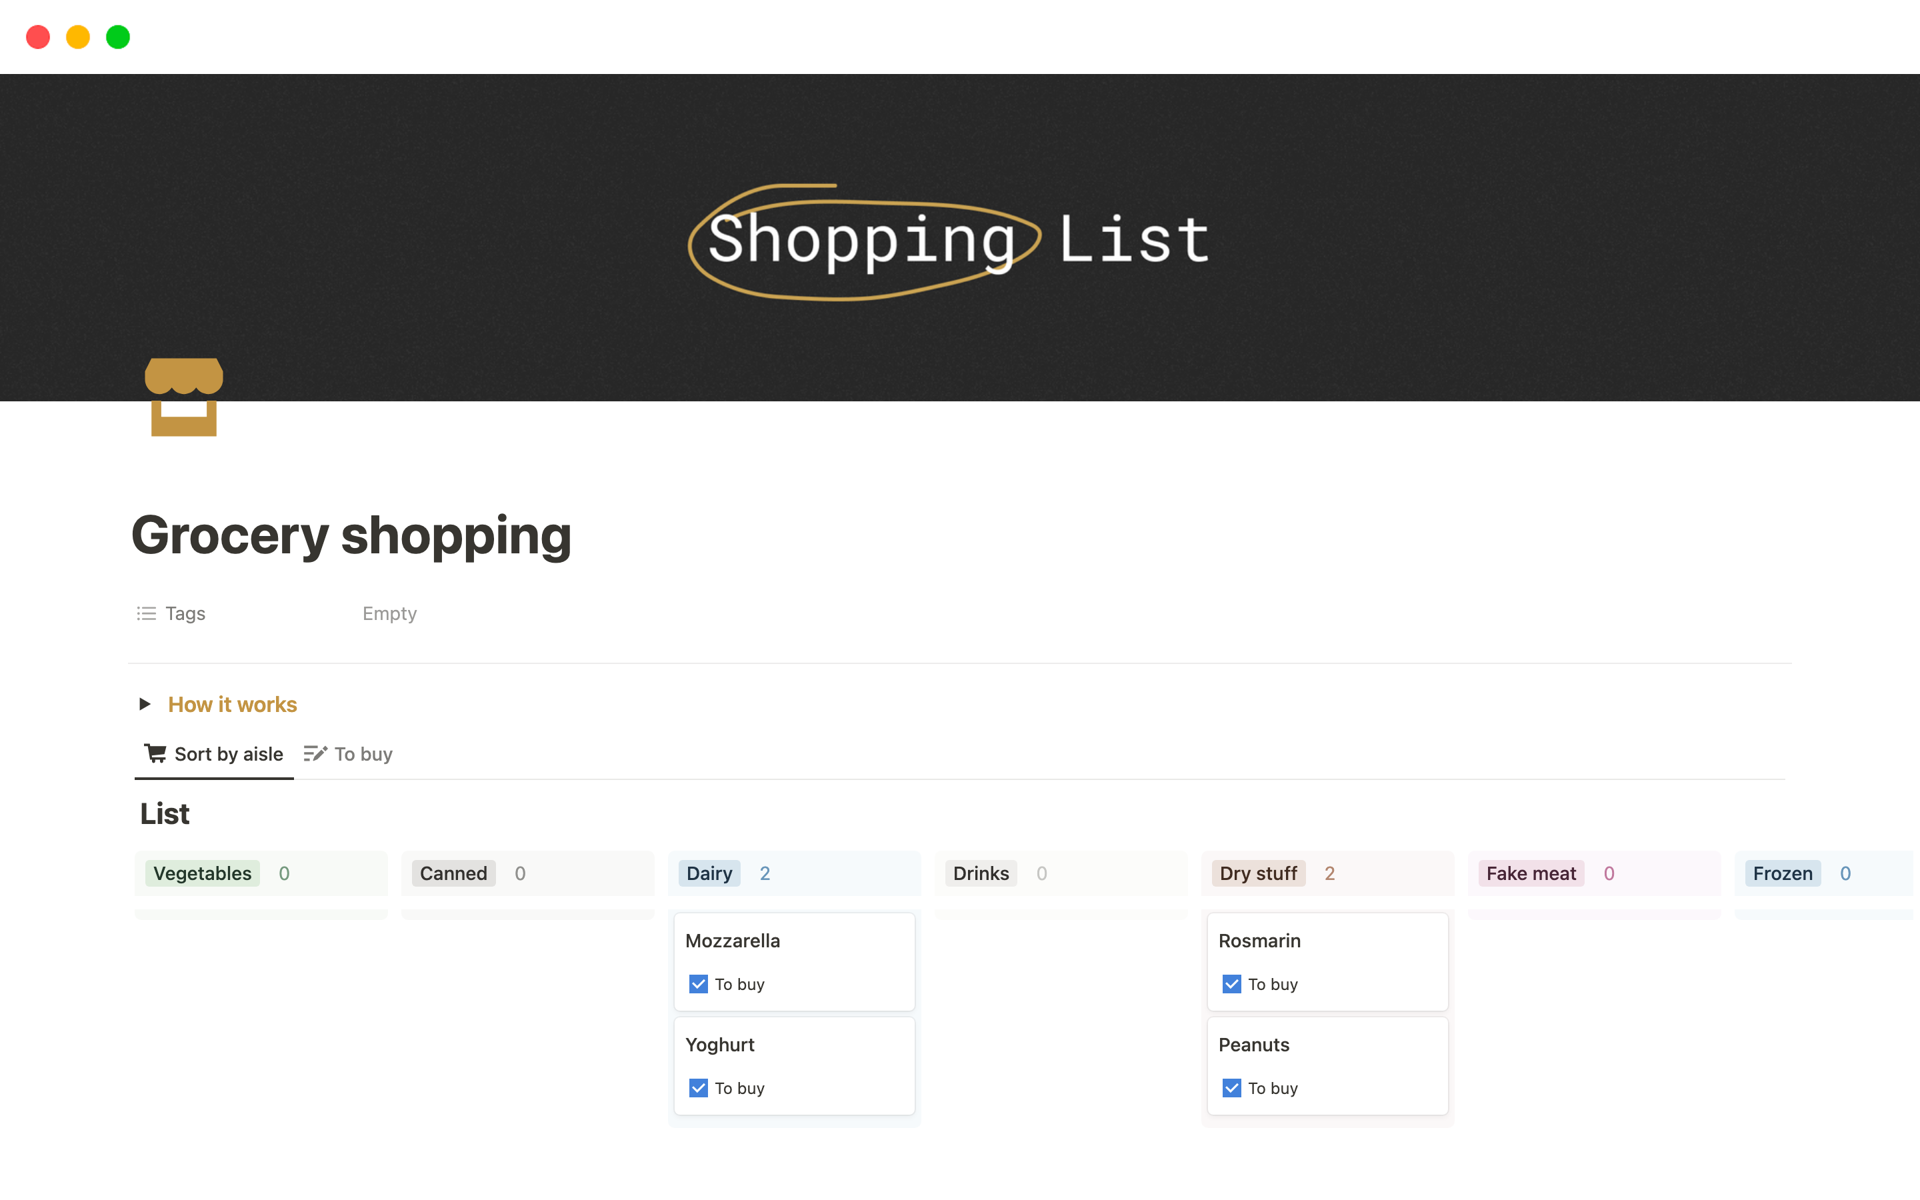 Shopping list where items get automatically organized by isle so that navigating the supermarket becomes more efficient